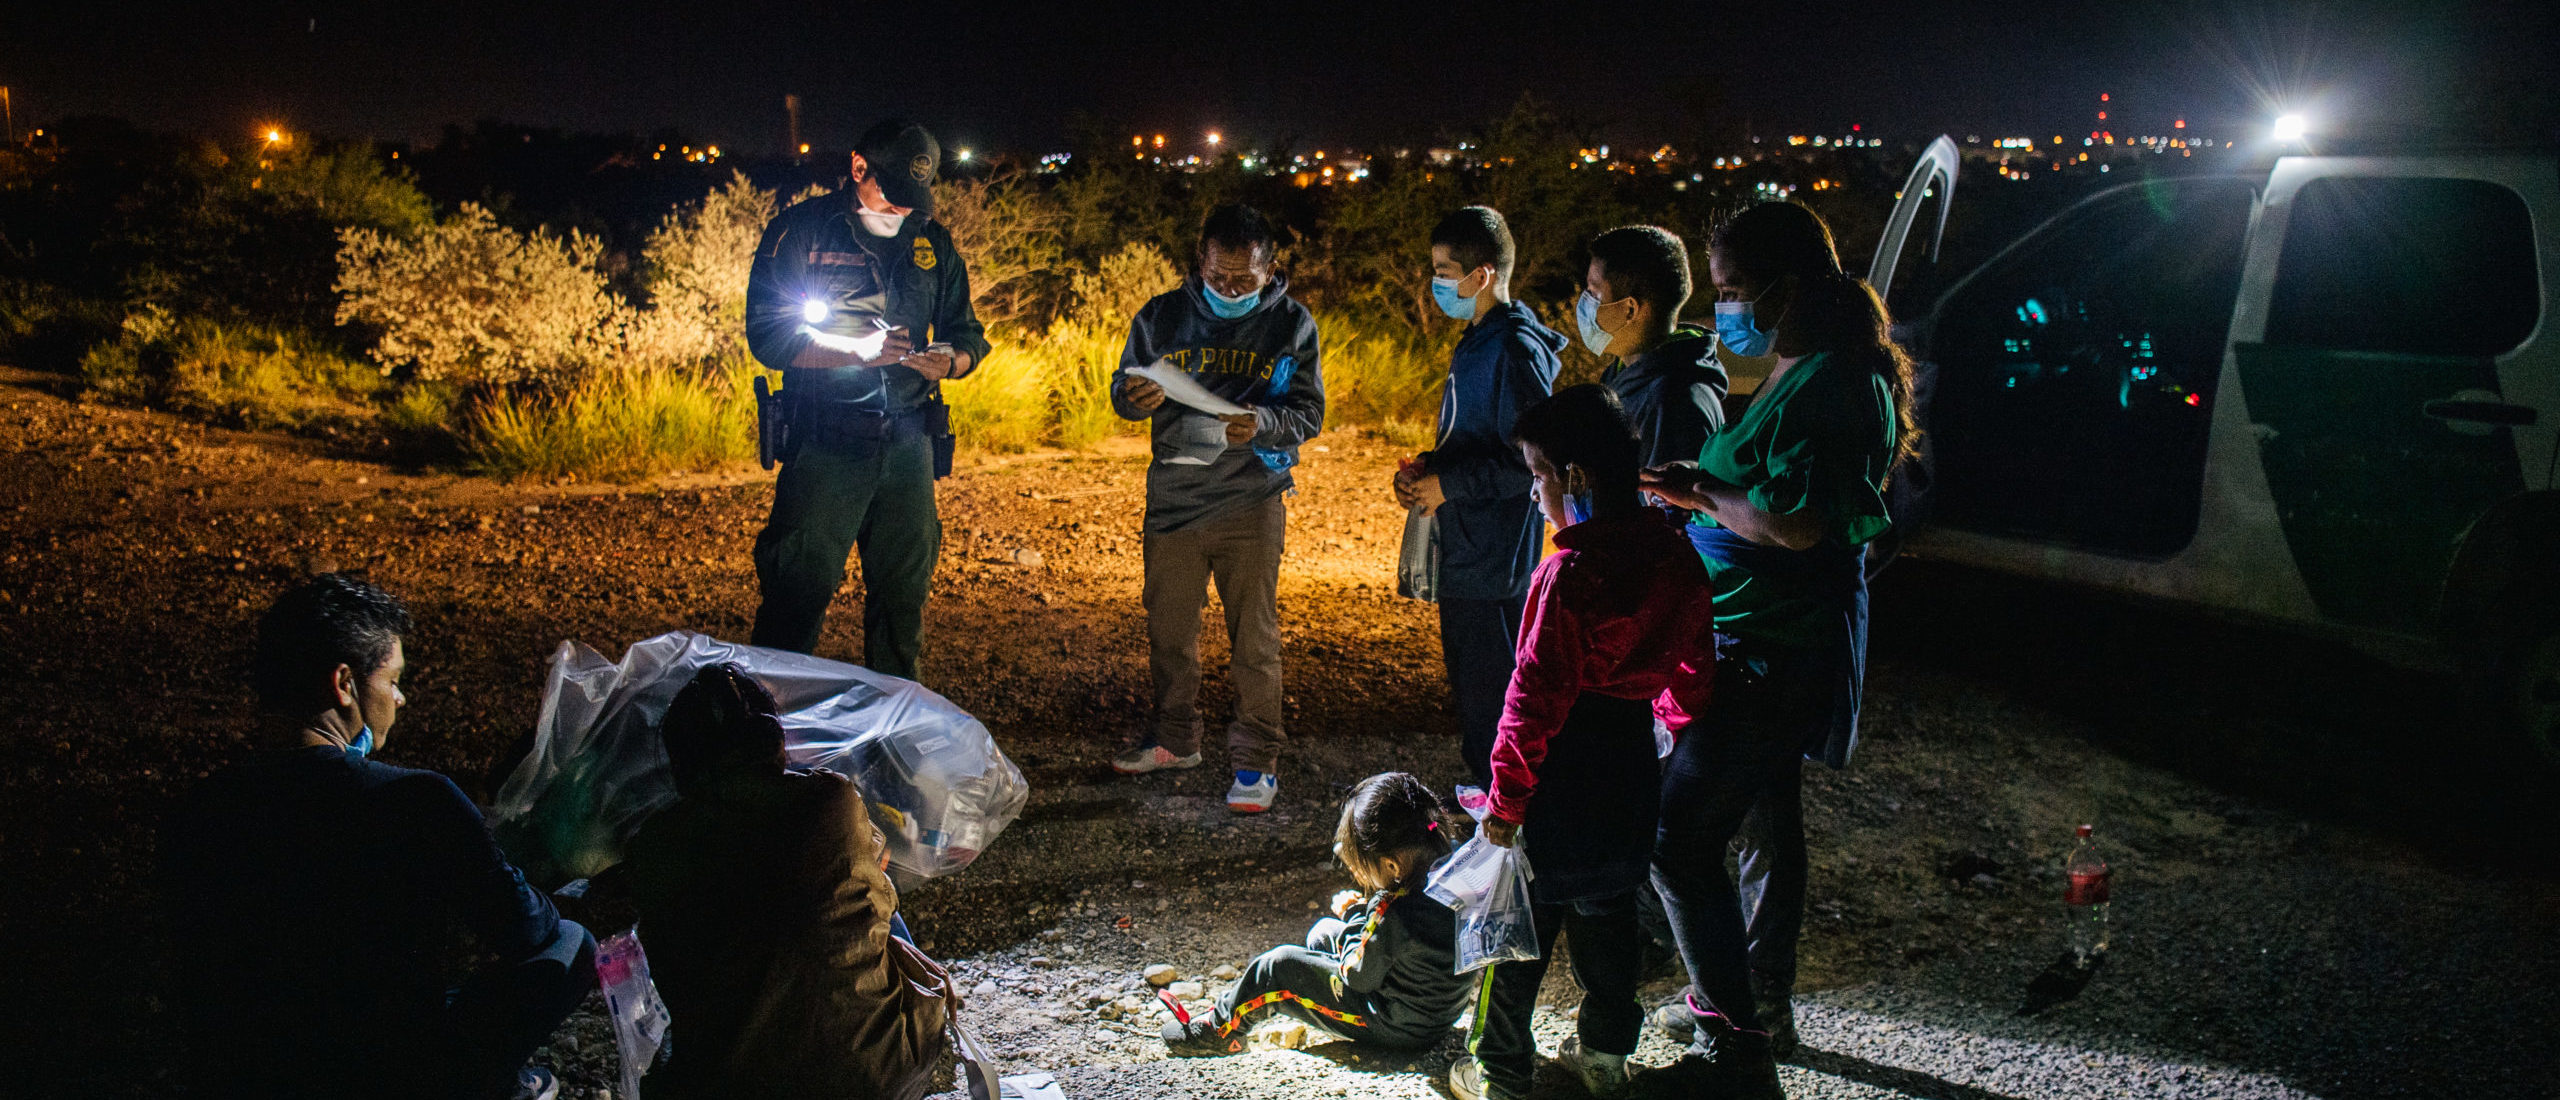 ROMA, TEXAS - JULY 01: Migrants are accounted for and processed by border patrol after crossing the Rio Grande into the United States on July 01, 2021 in Roma, Texas. Recently, Texas Gov. Greg Abbott has pledged to build a state-funded border wall as a surge of mostly Central American immigrants crossing into the United States continues to challenge U.S. immigration agencies. So far in 2021, the border patrol has apprehended more than 900,000 immigrants crossing into the U.S. from Mexico. (Photo by Brandon Bell/Getty Images)